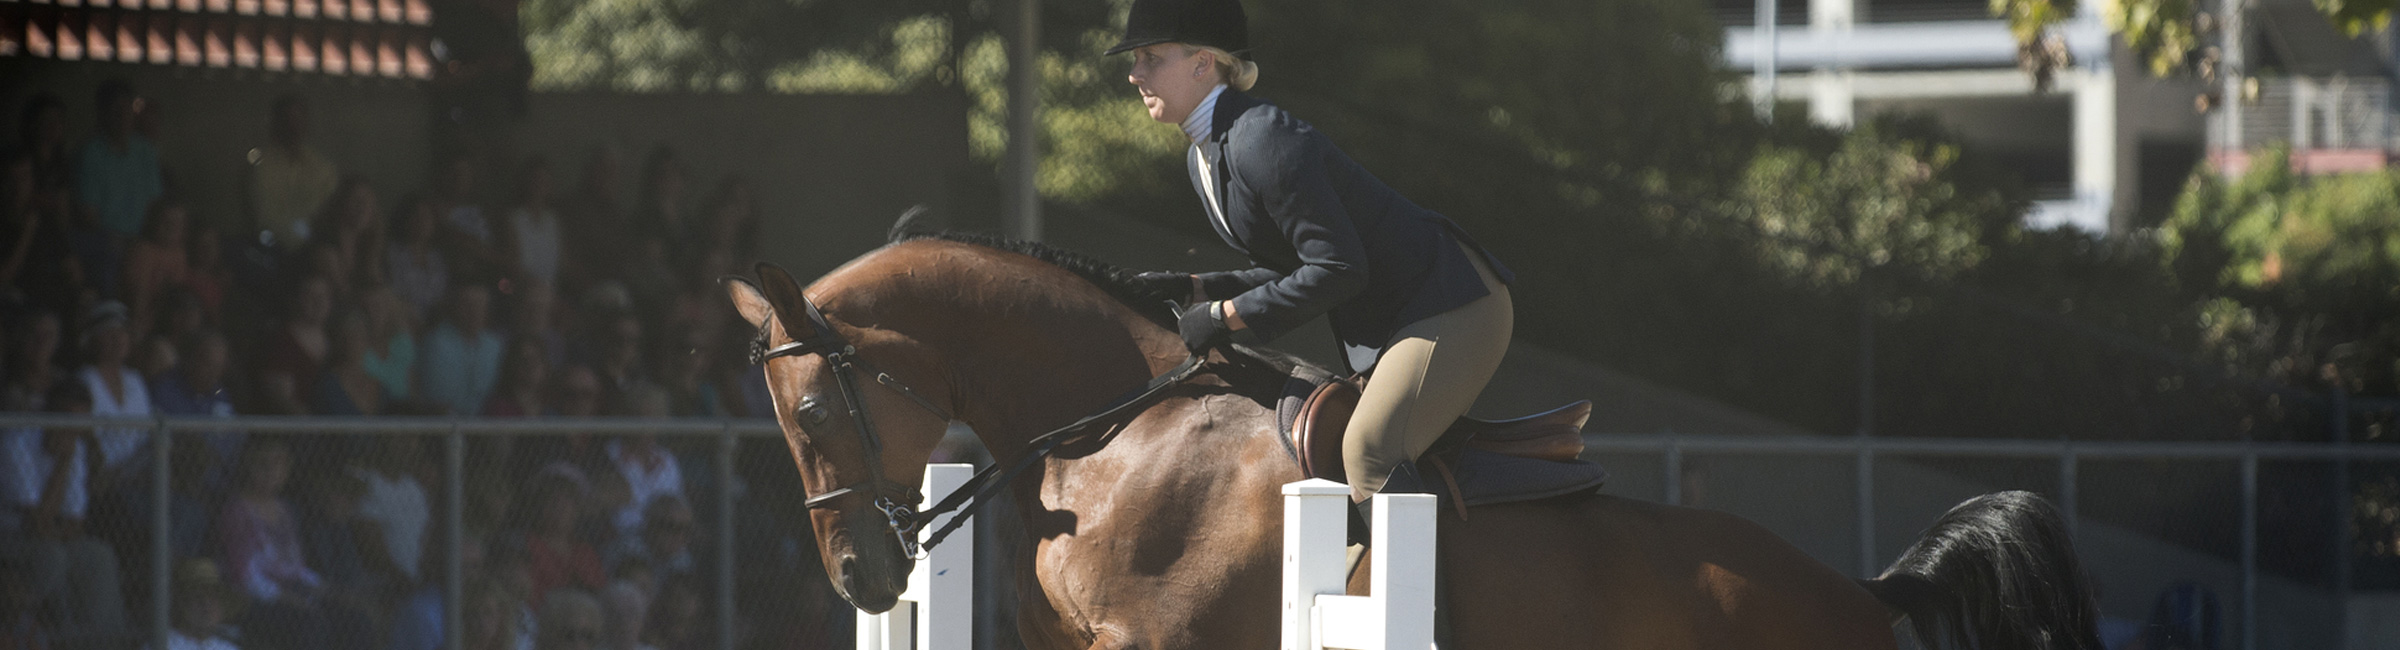 Female equestrian takes a jump with horse at a show